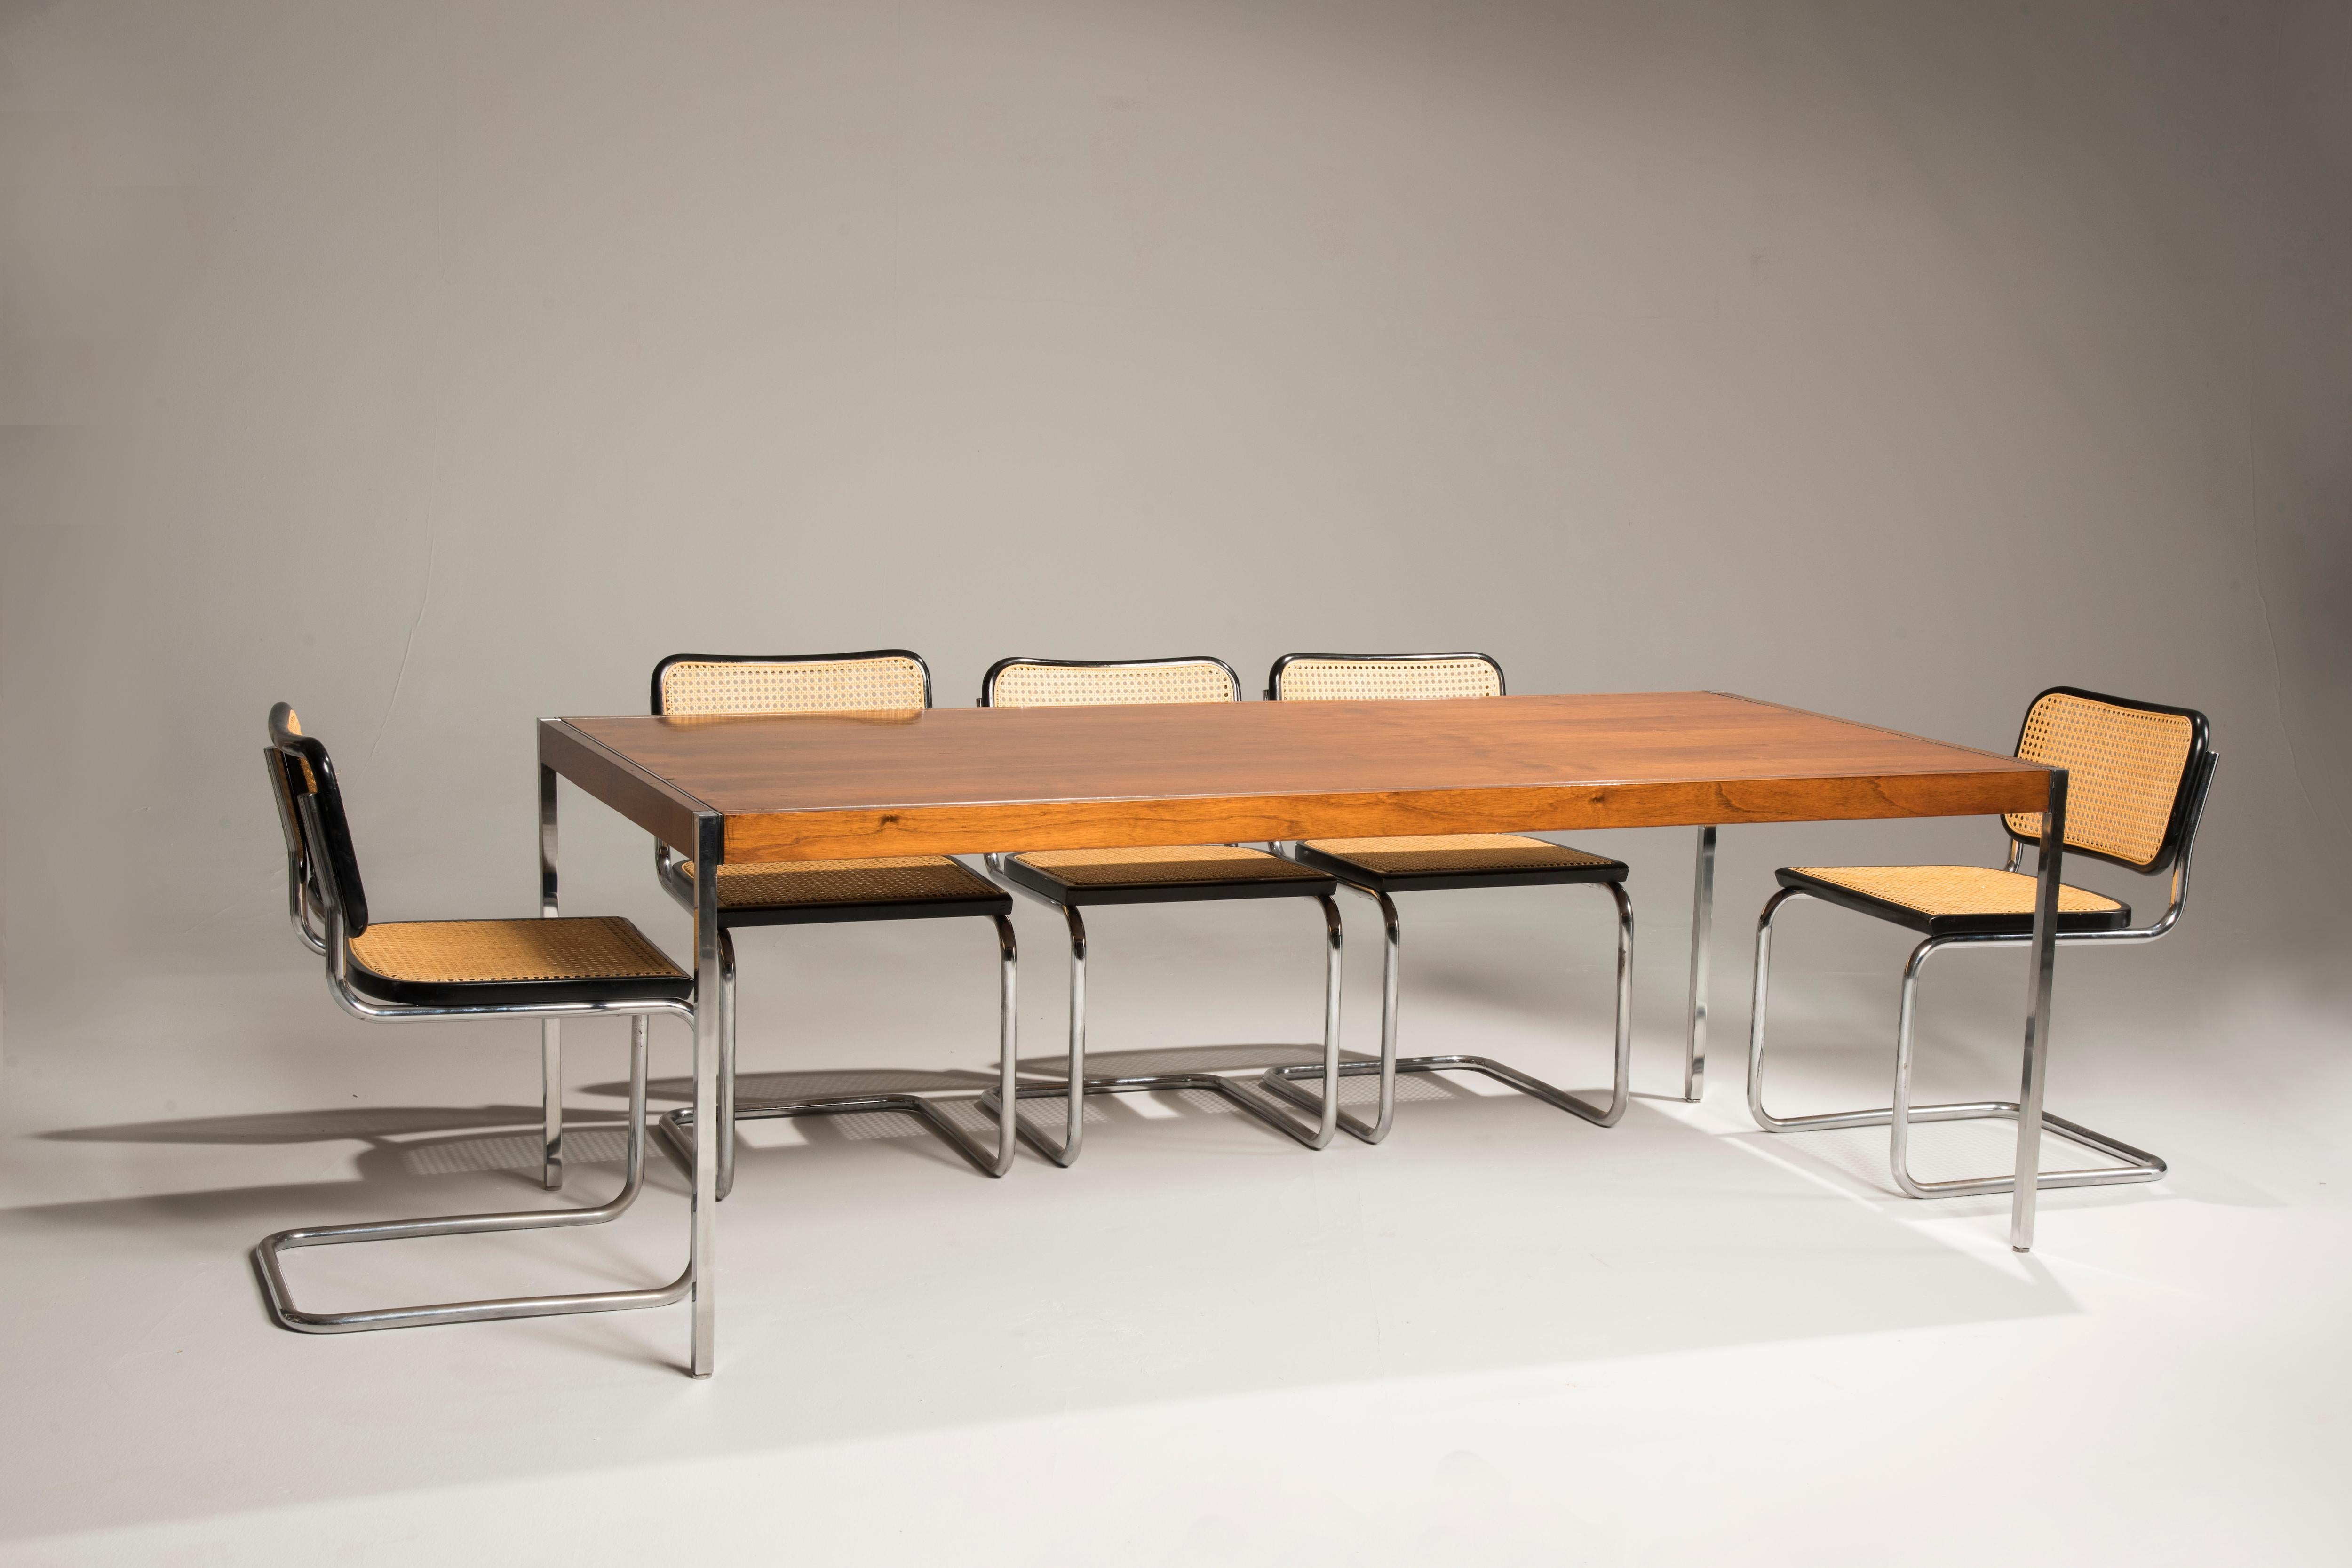 Bauhaus Marcel Breuer Cesca Chairs for Knoll Production, 8 Chairs Available 2